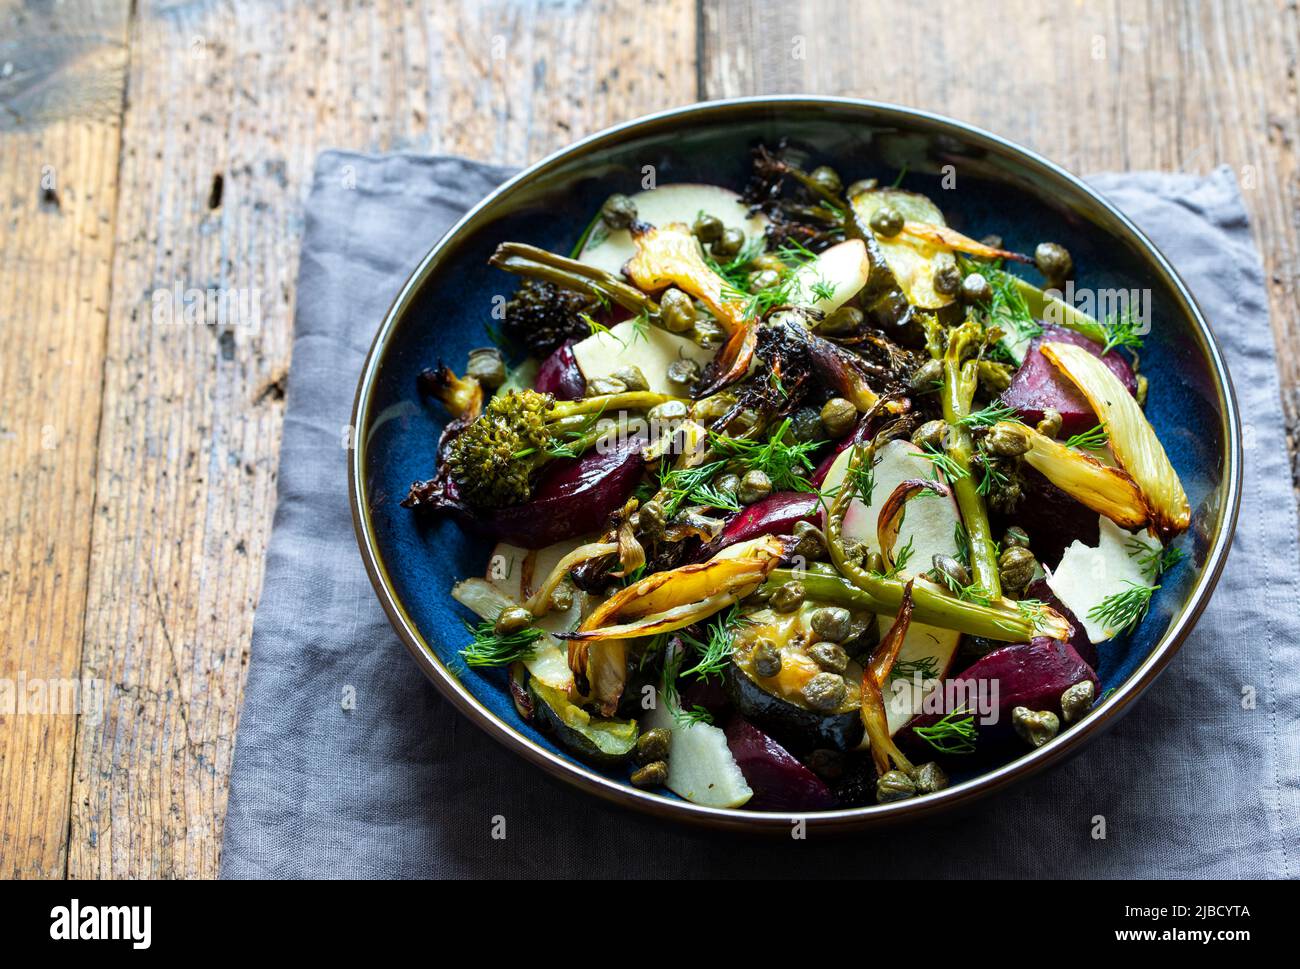 Warm salad with roast beetroor, broccoli, apple, fennel and crispy capers Stock Photo